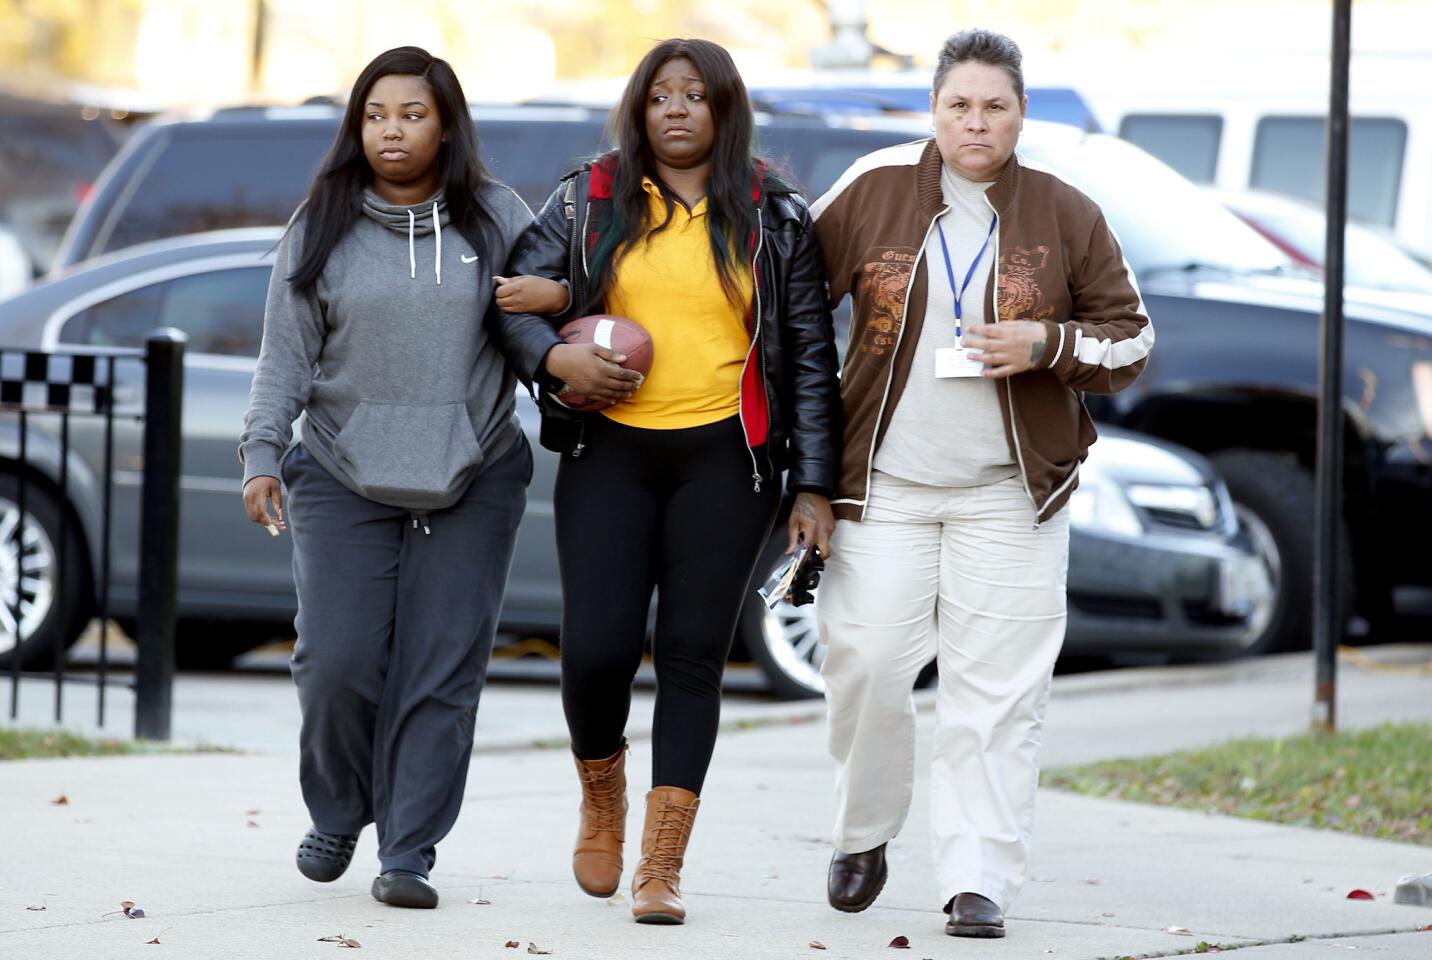 Holding a football and her son's photo, Karla Lee, center, arrives at Chicago Police District Area 5 headquarters on Nov. 3, 2015, to ask the public to help find the person who shot and killed her 9-year-old son Tyshawn Lee the day before.